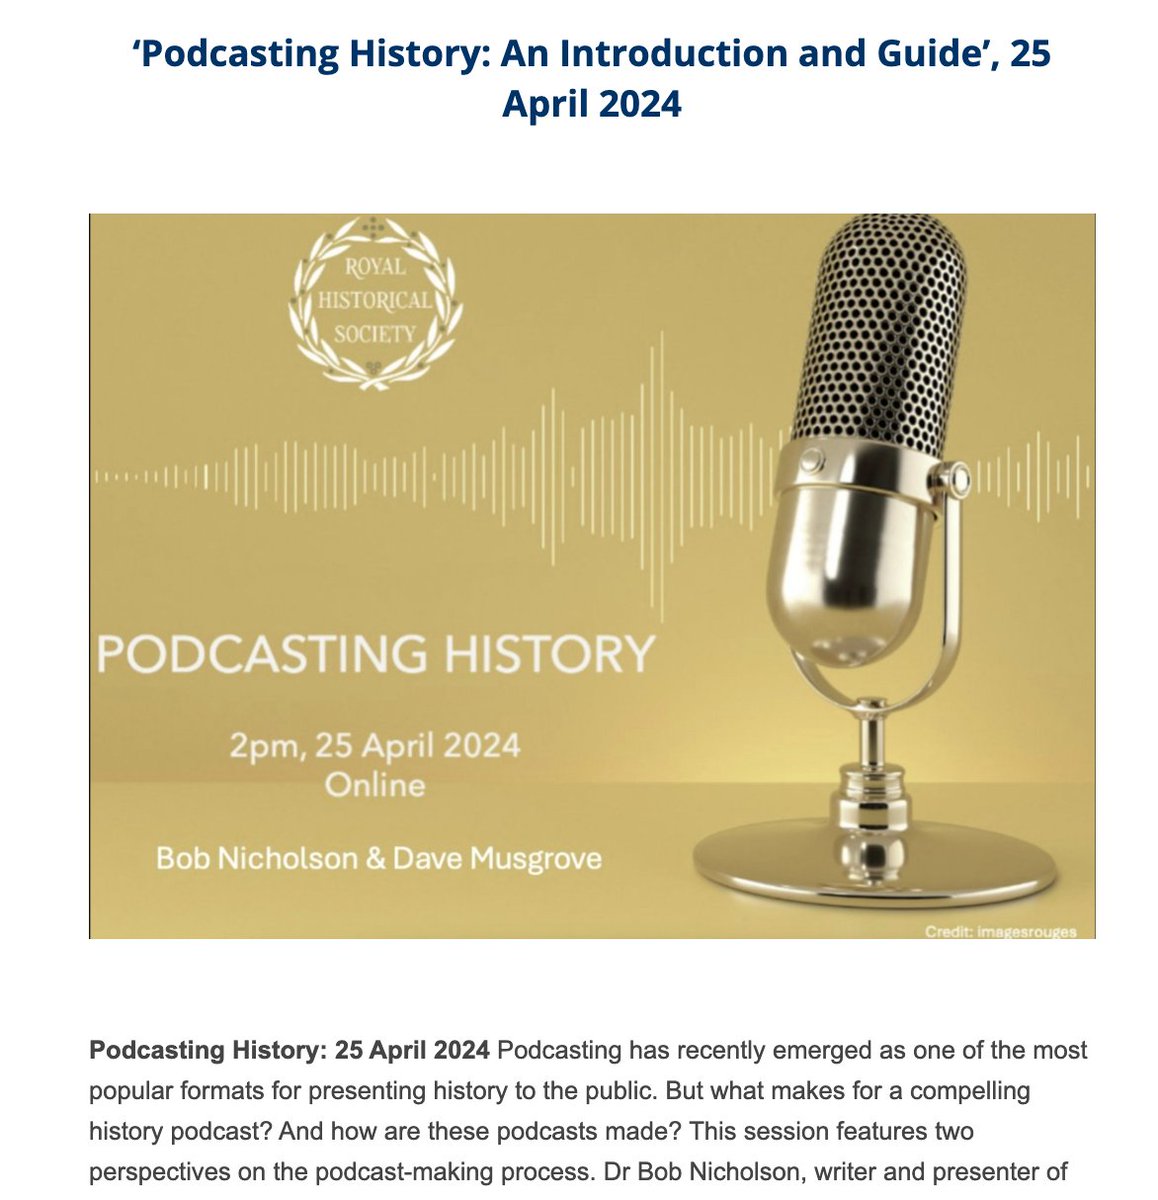 Recording of @RoyalHistSoc's recent training event - 'Podcasting History' - is now available bit.ly/3JOMmw0. This workshop, presented by @DigiVictorian and @DJMusgrove, provided expert advice on creating your own #history podcast #twitterstorians